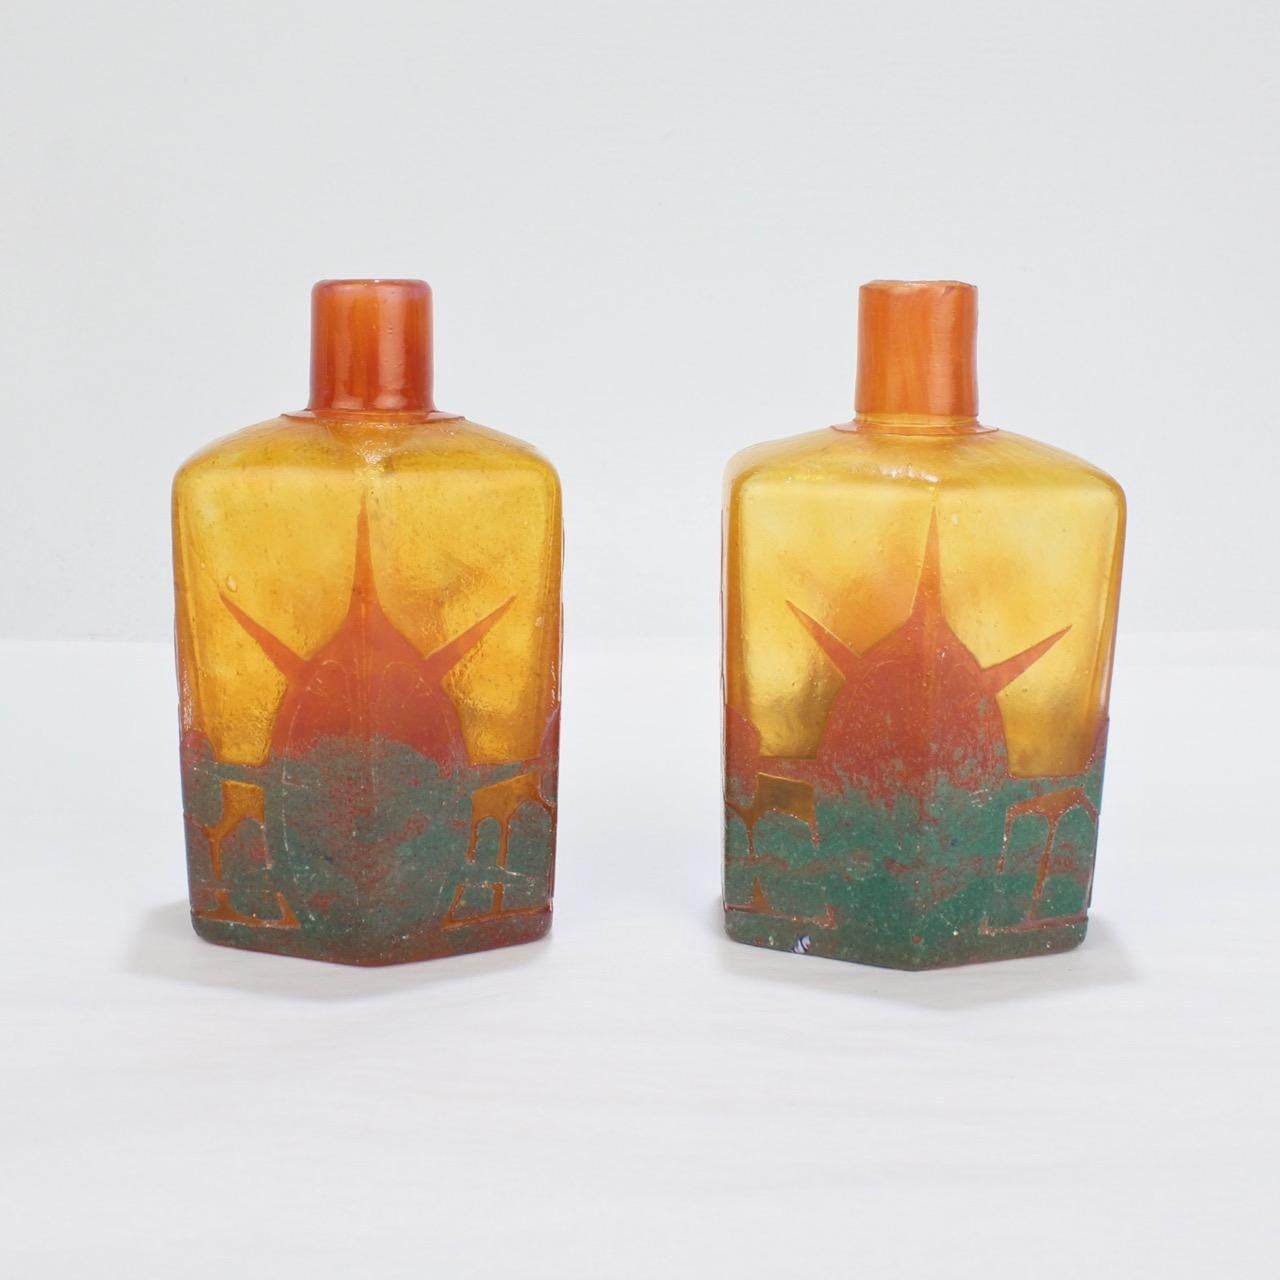 A fine matched pair of Charles Schneider (or Charder Le Verre Francais) French art glass bottles.

Each cut with what appears to be a stylized rising sun or daybreak scene in orange, red, and green tones.

The bases each have a 'candy cane'